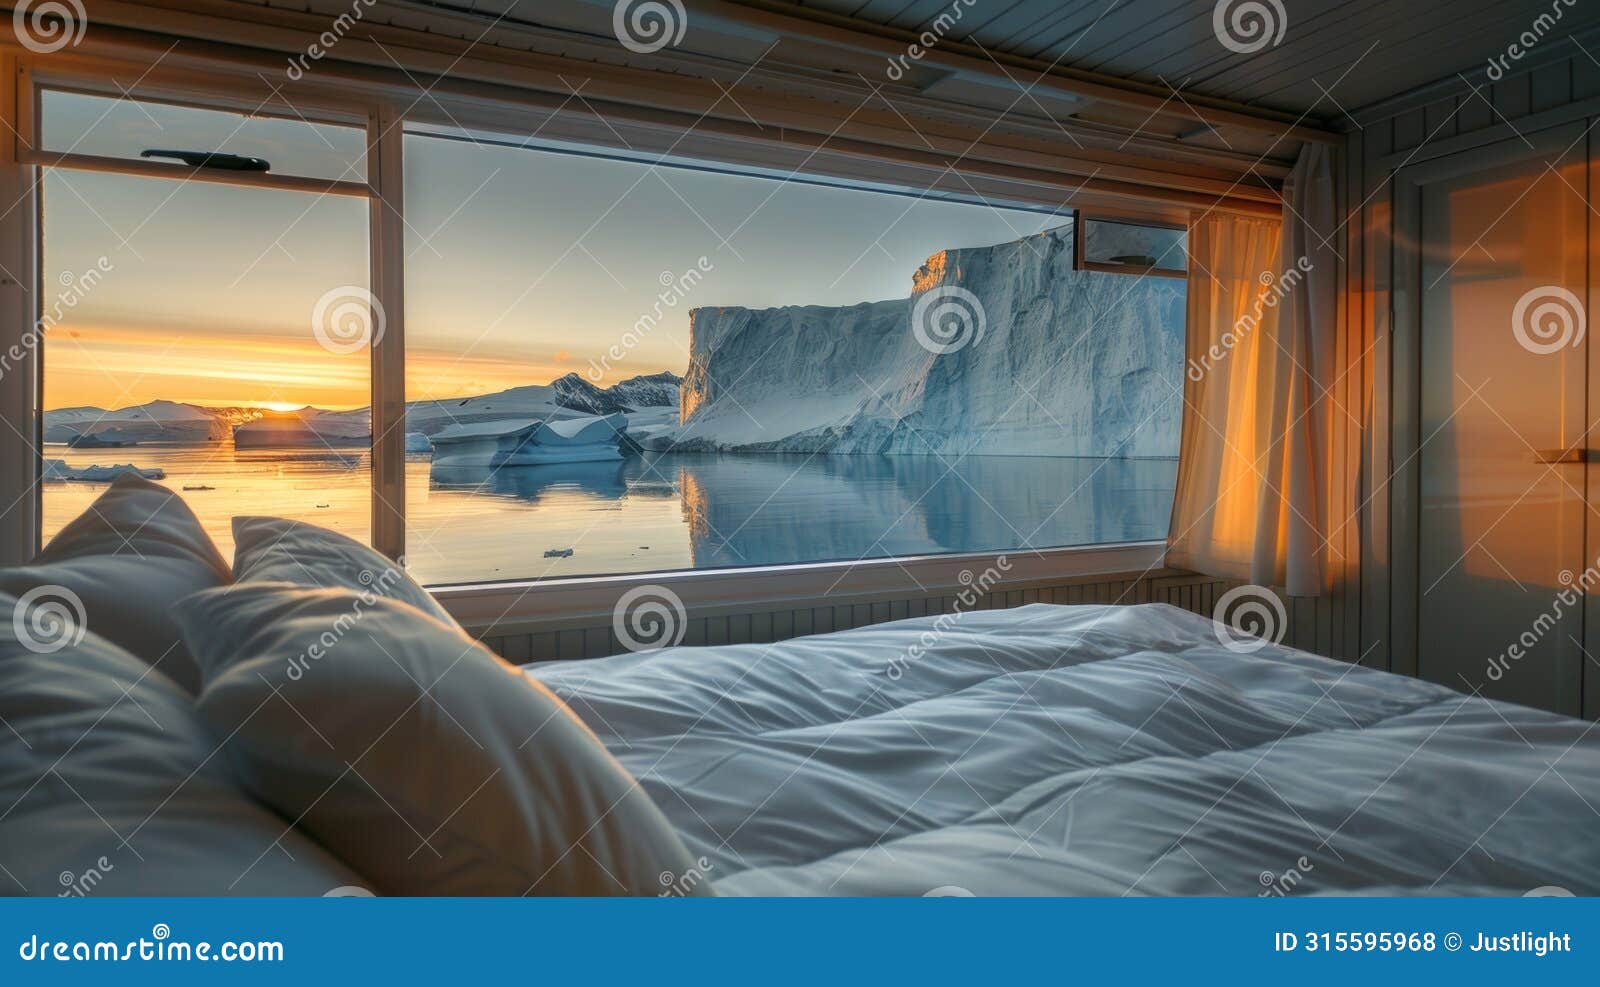 a restful night in a warm and cozy cabin with the mesmerizing sight of the midnight sun reflecting off the icebergs